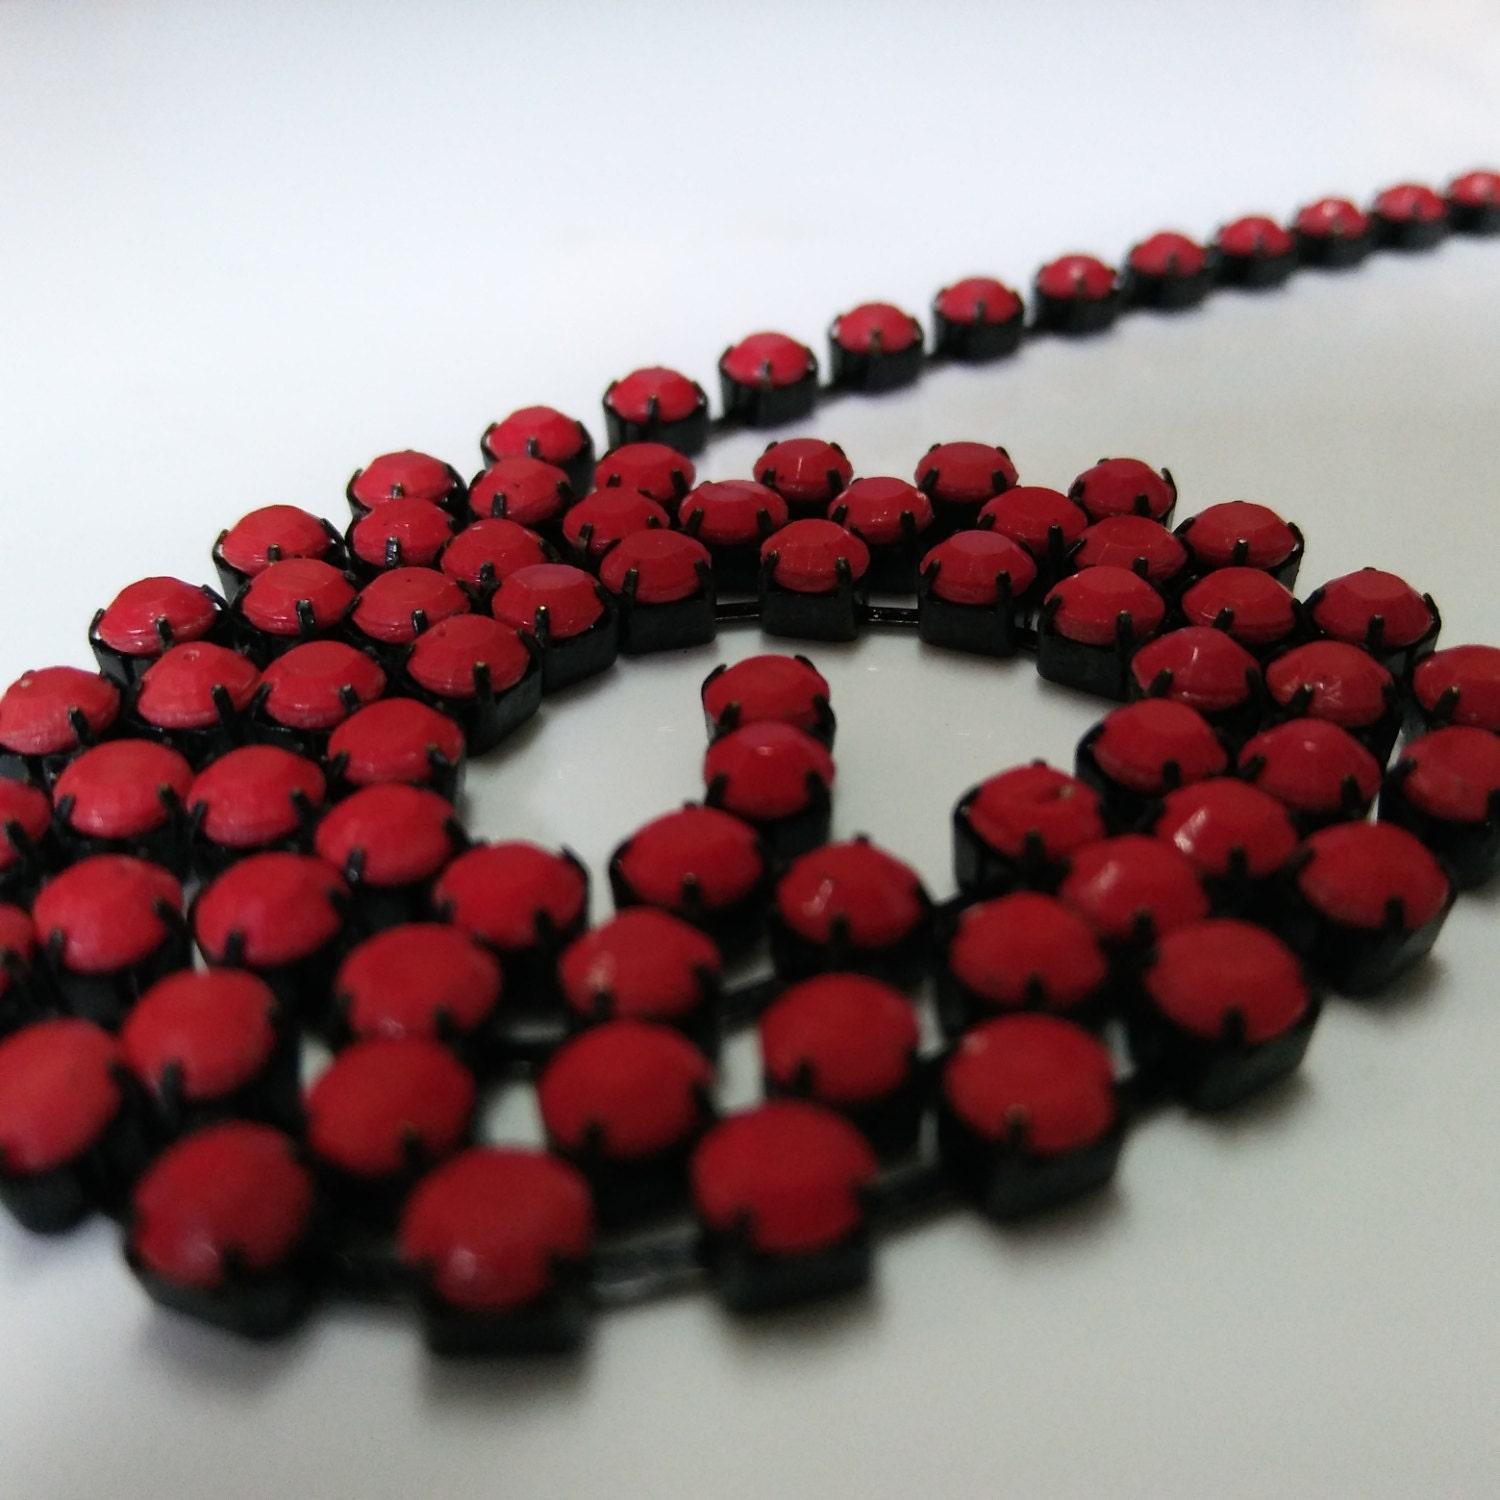 16 SS Rhinestone Chain Vintage Glass Vintage Pressed Chatons Coral Red Opaque Antique Black Plated (4mm) 1/2/5/15 Meters